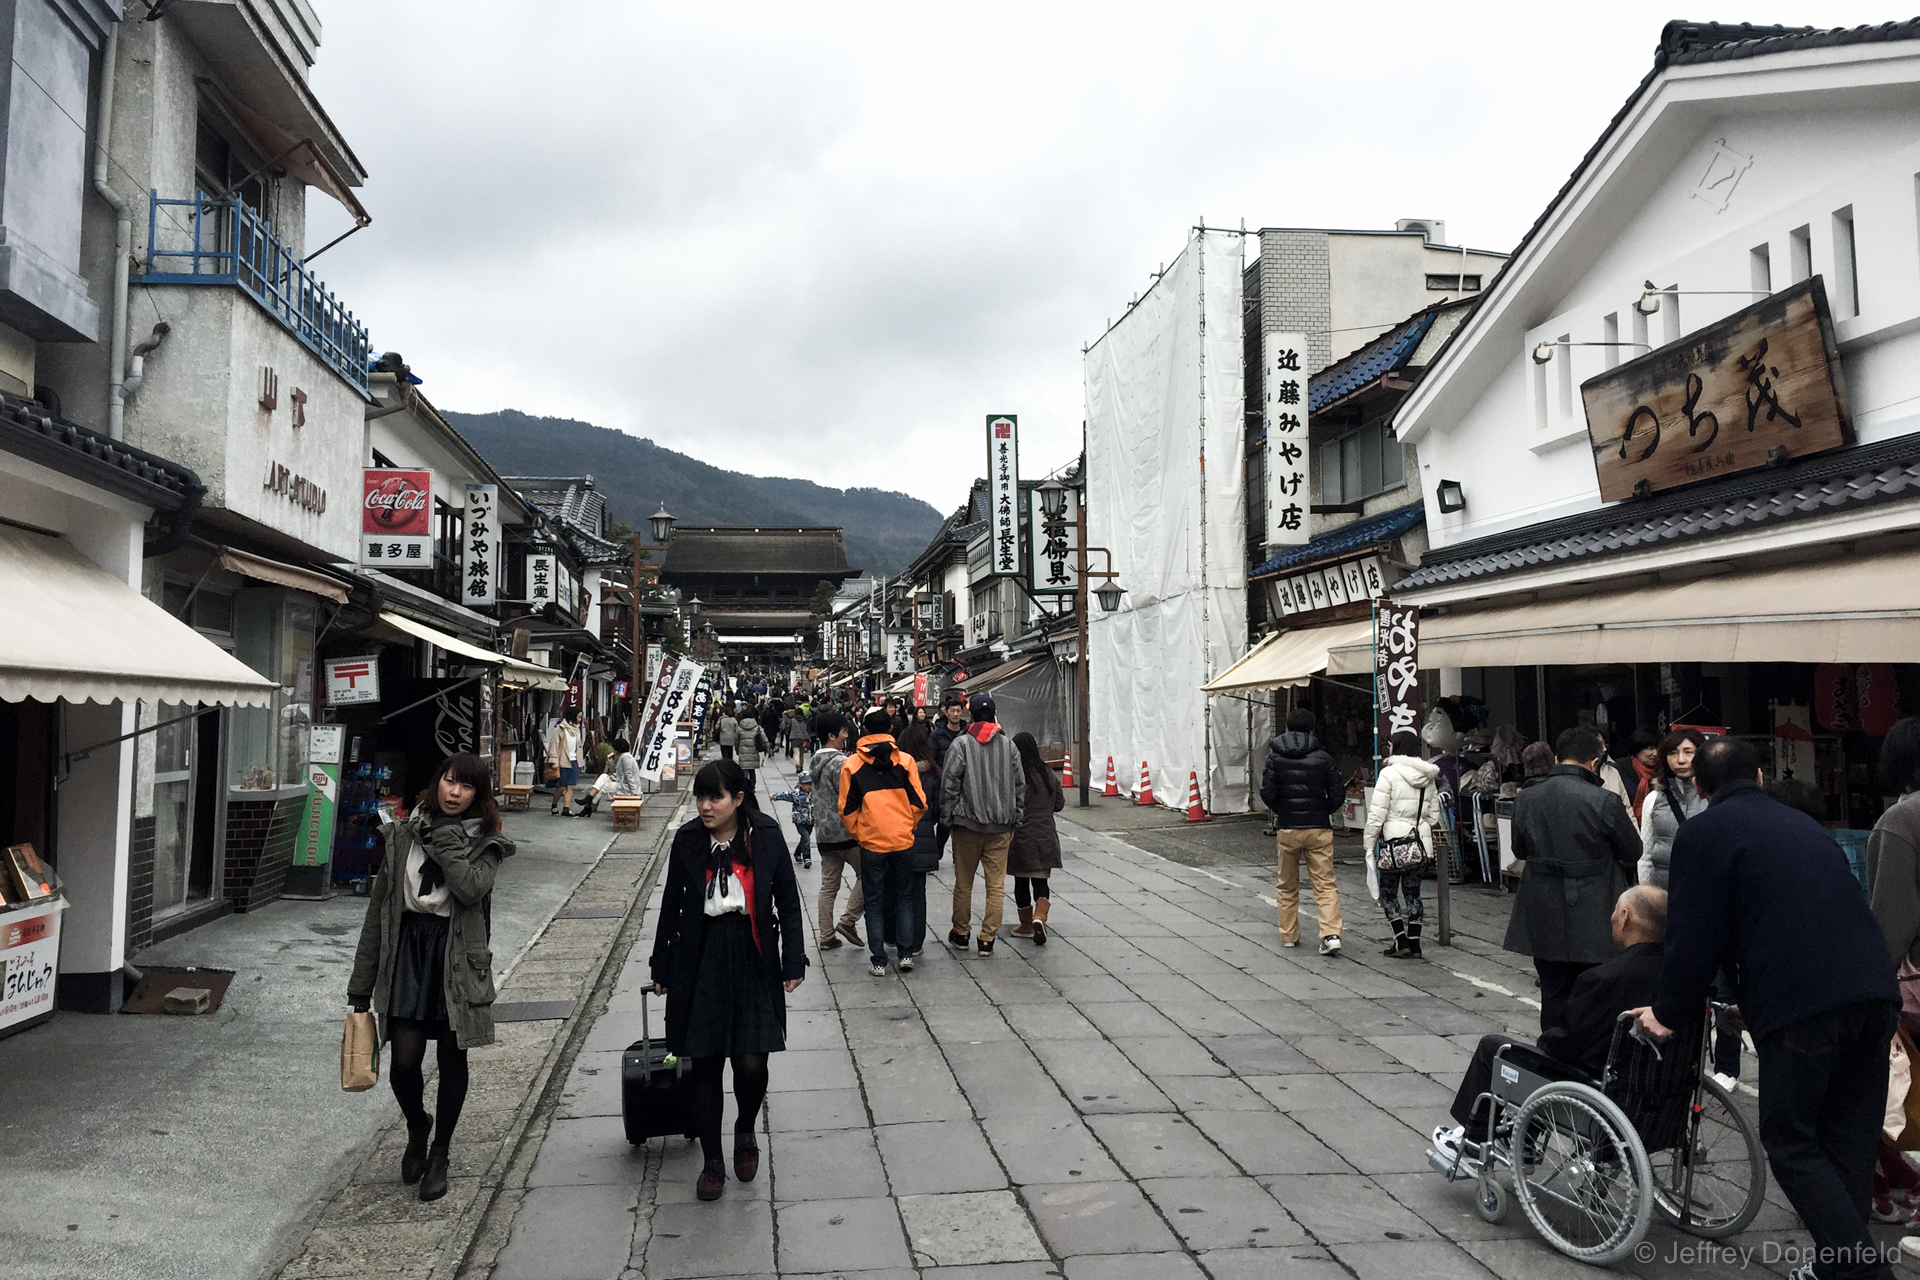 The pathway leading to the Zenkoji Temple is crowded with vendors and restaurtants - but is a nice walk nontheless.